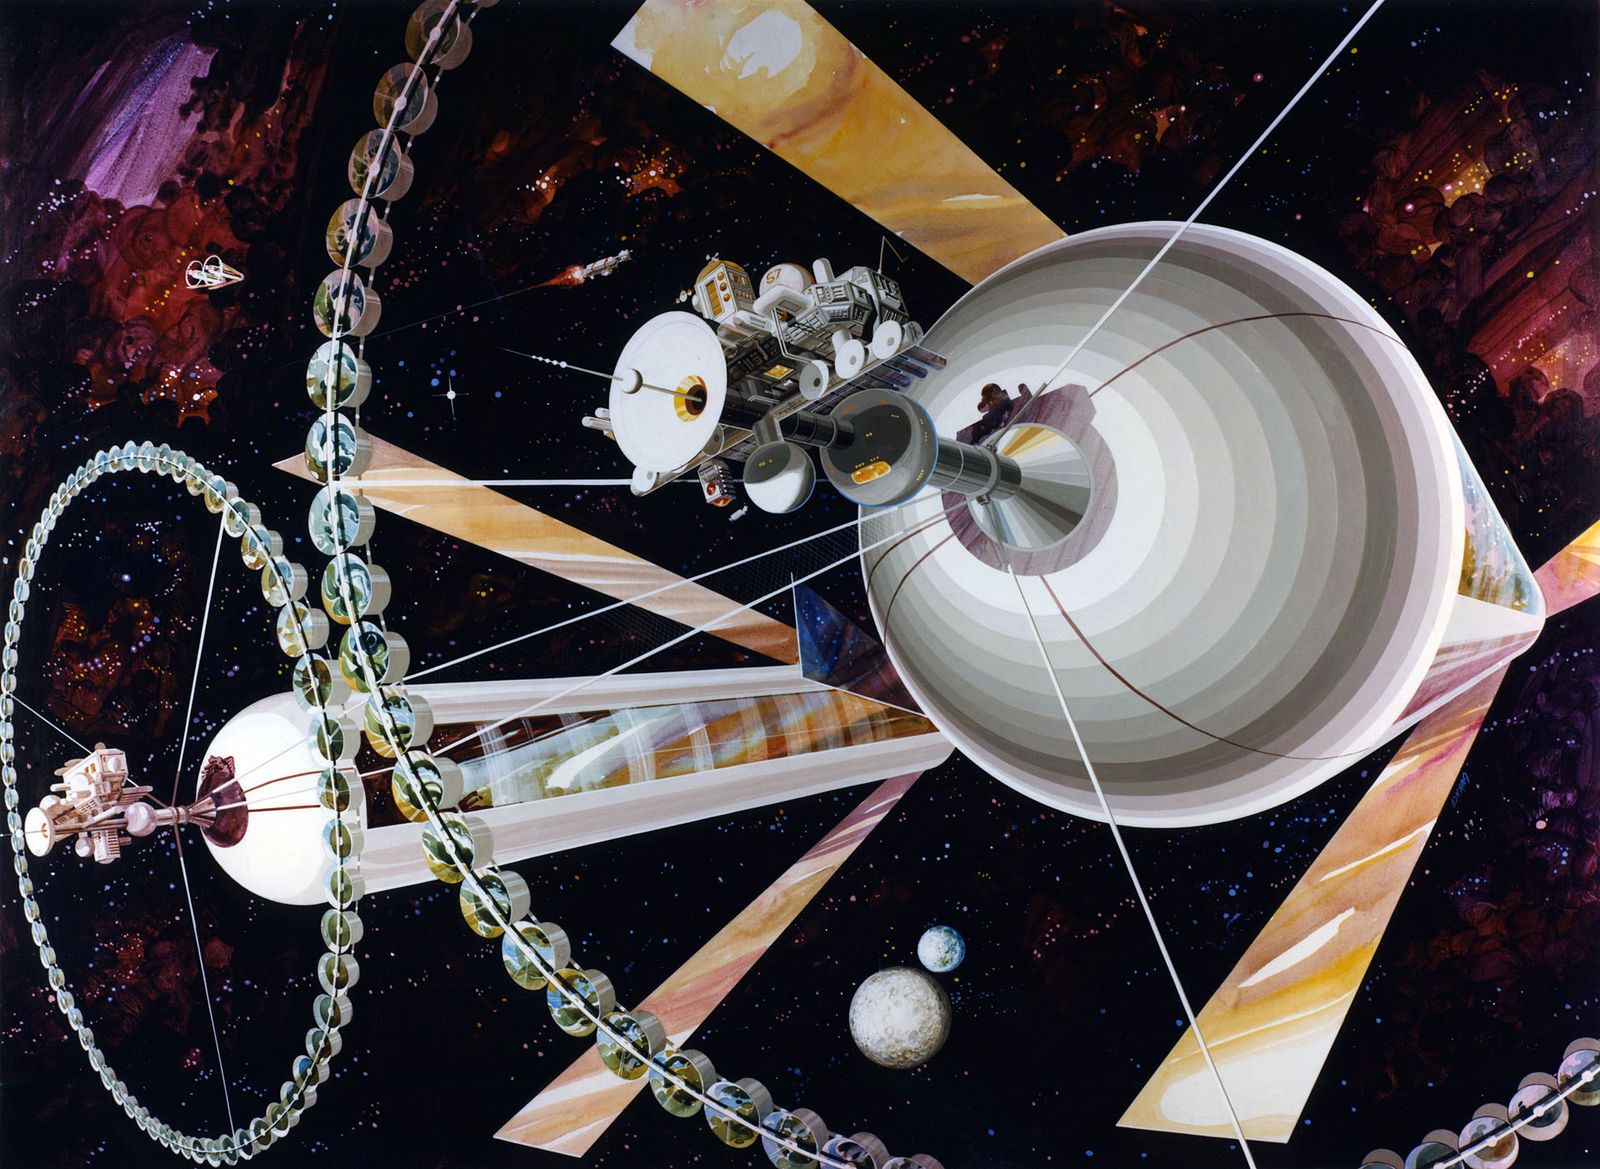 Space station concept images image 16